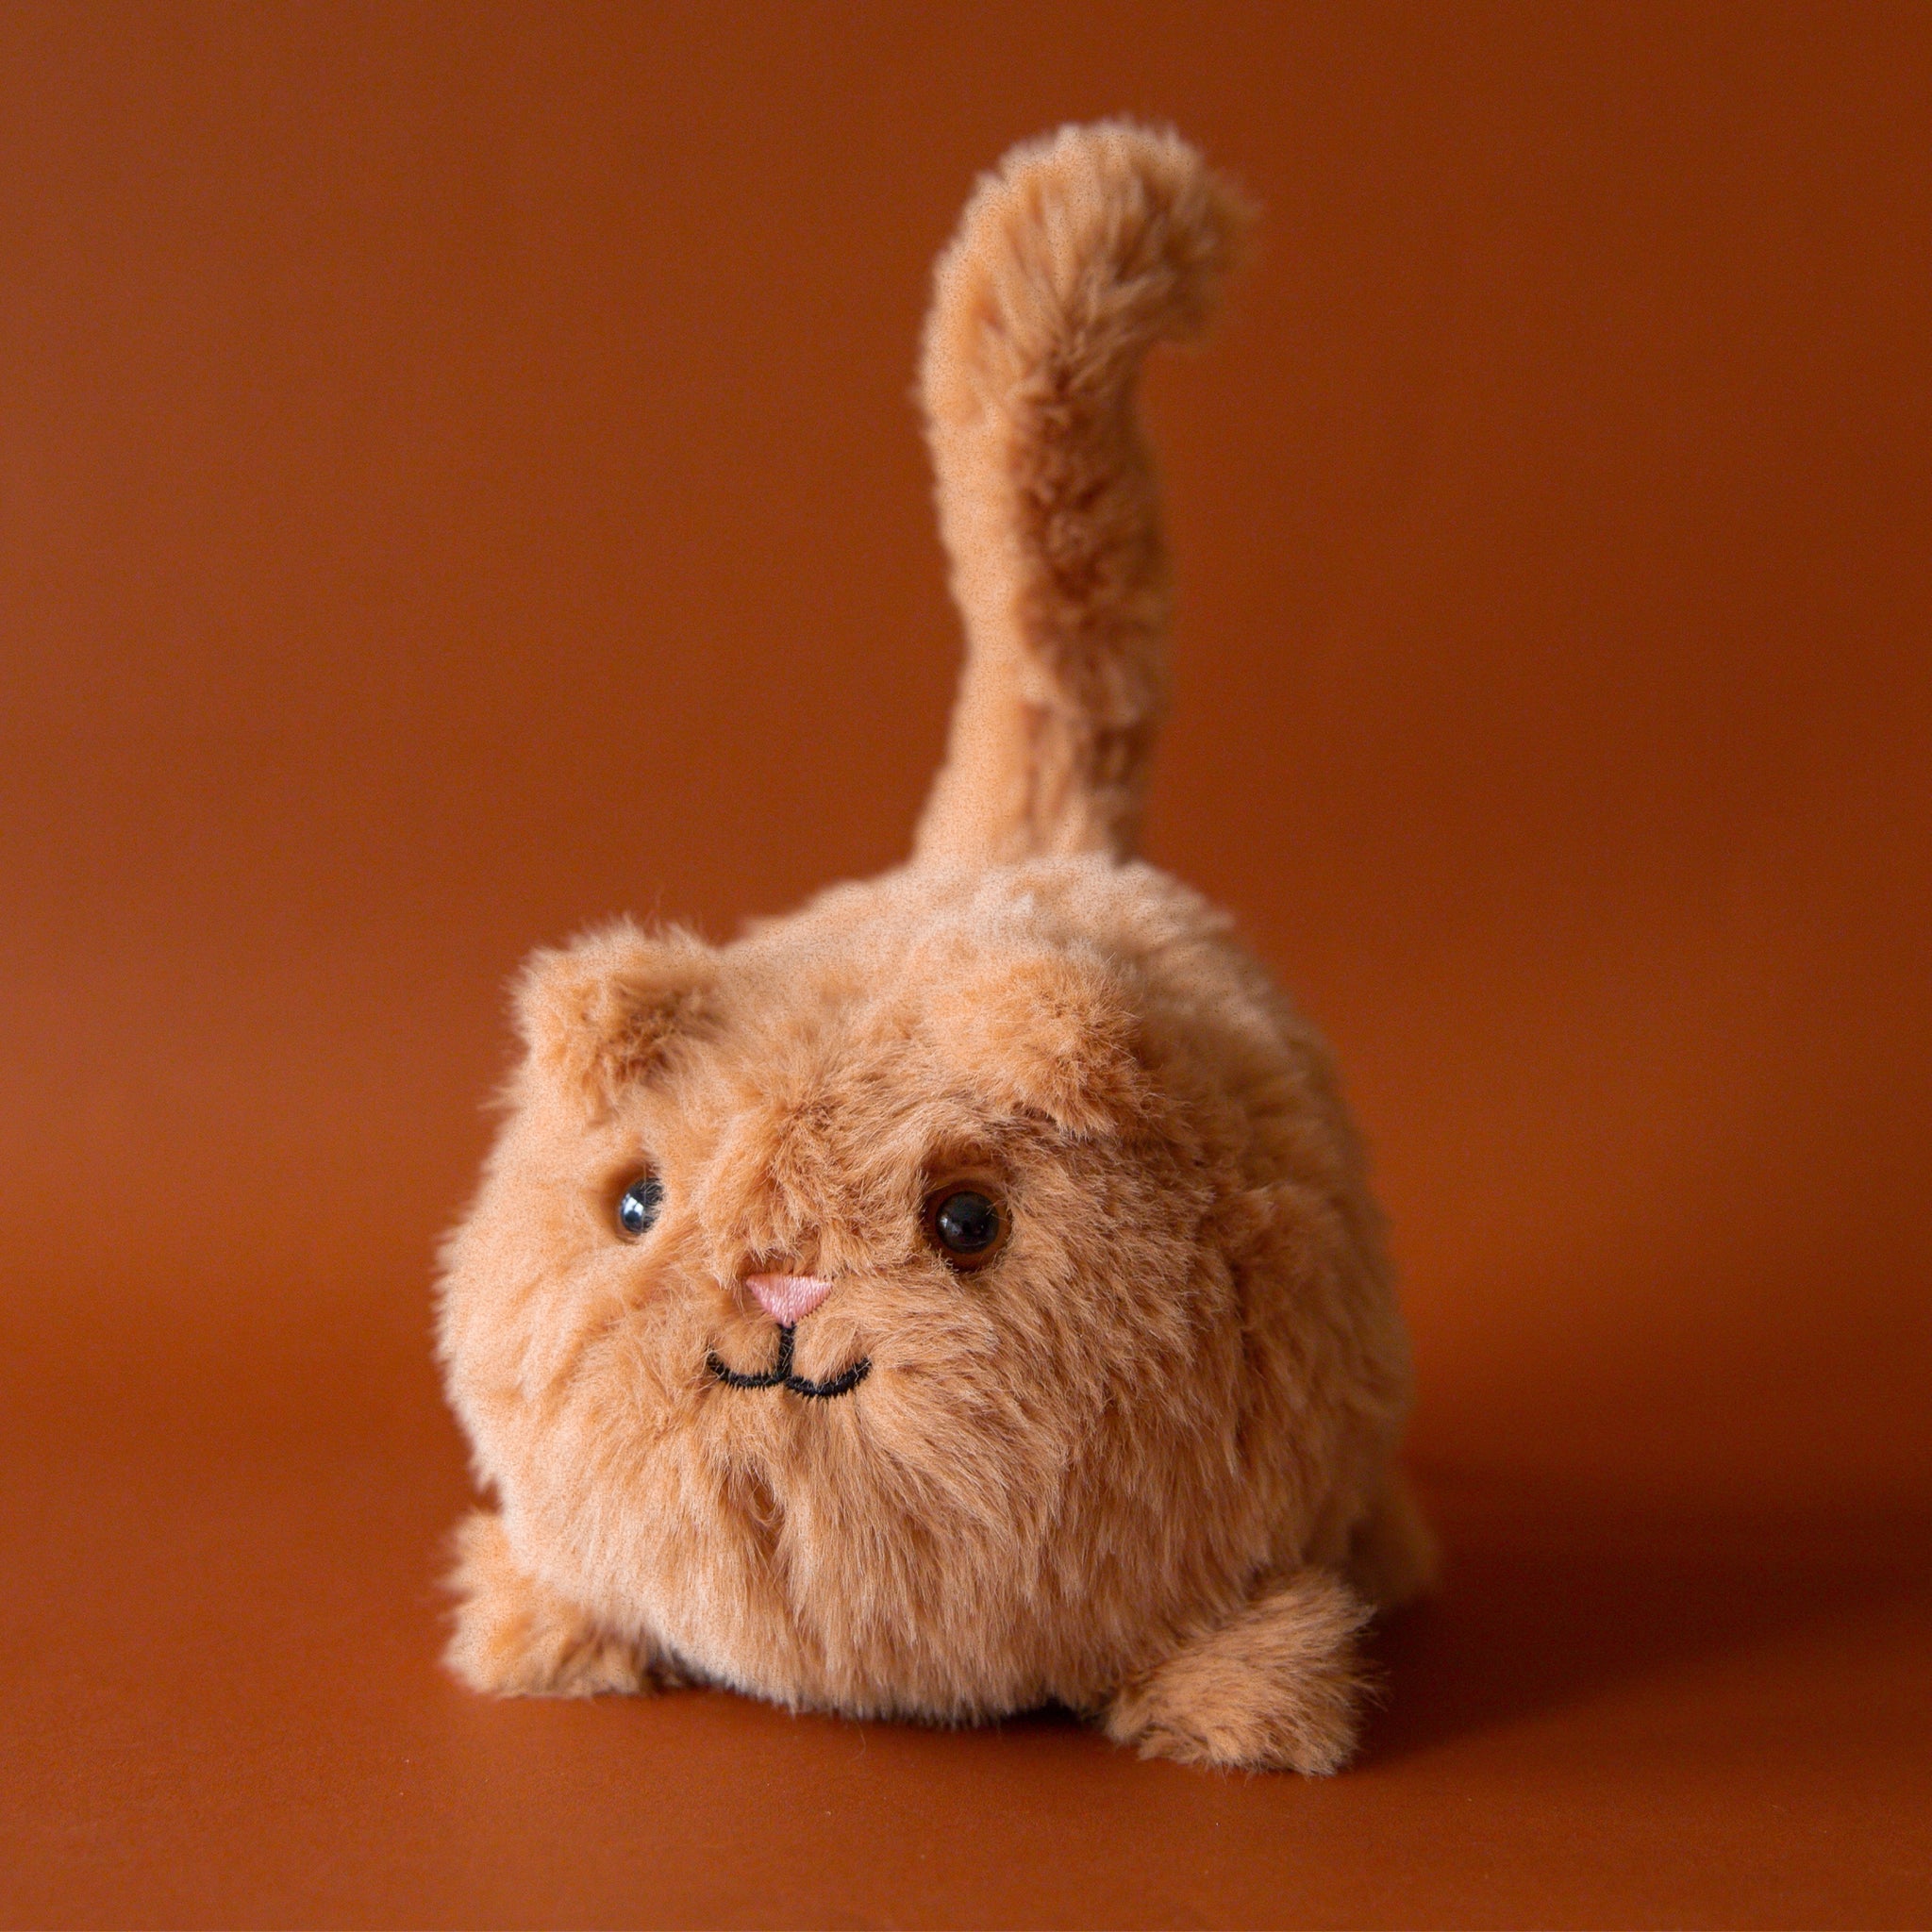 Soft stuffed animal in the shape of a round caramel colored cat with a question mark shaped tail